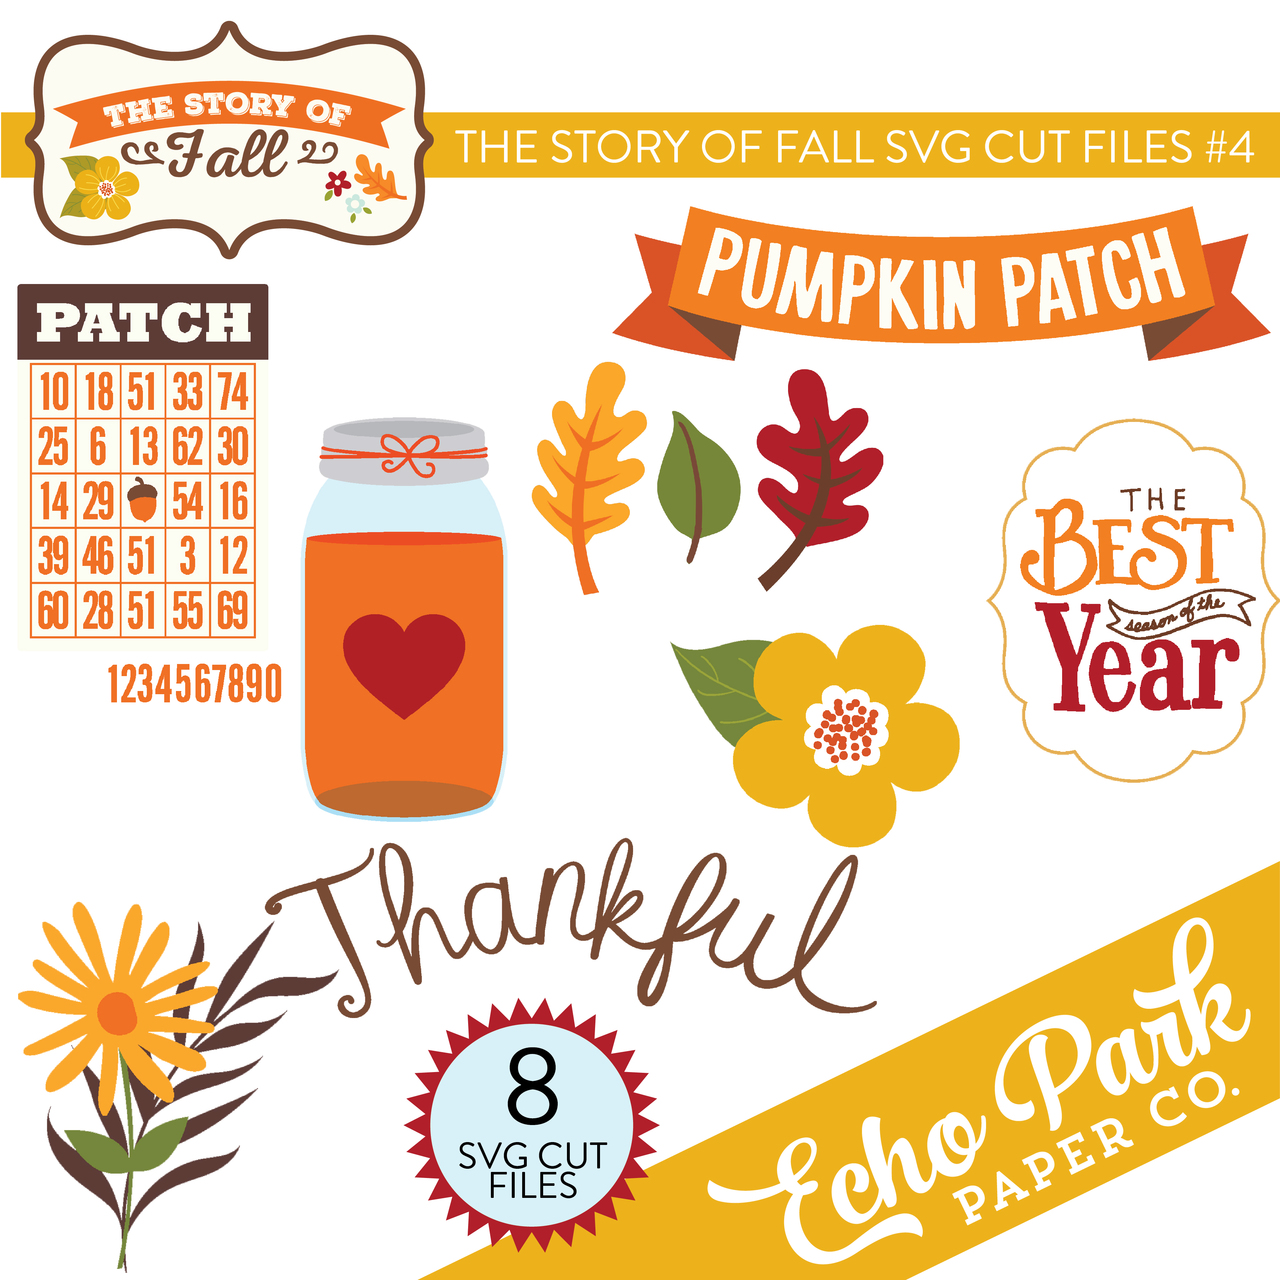 The Story of Fall SVG Cut Files #4